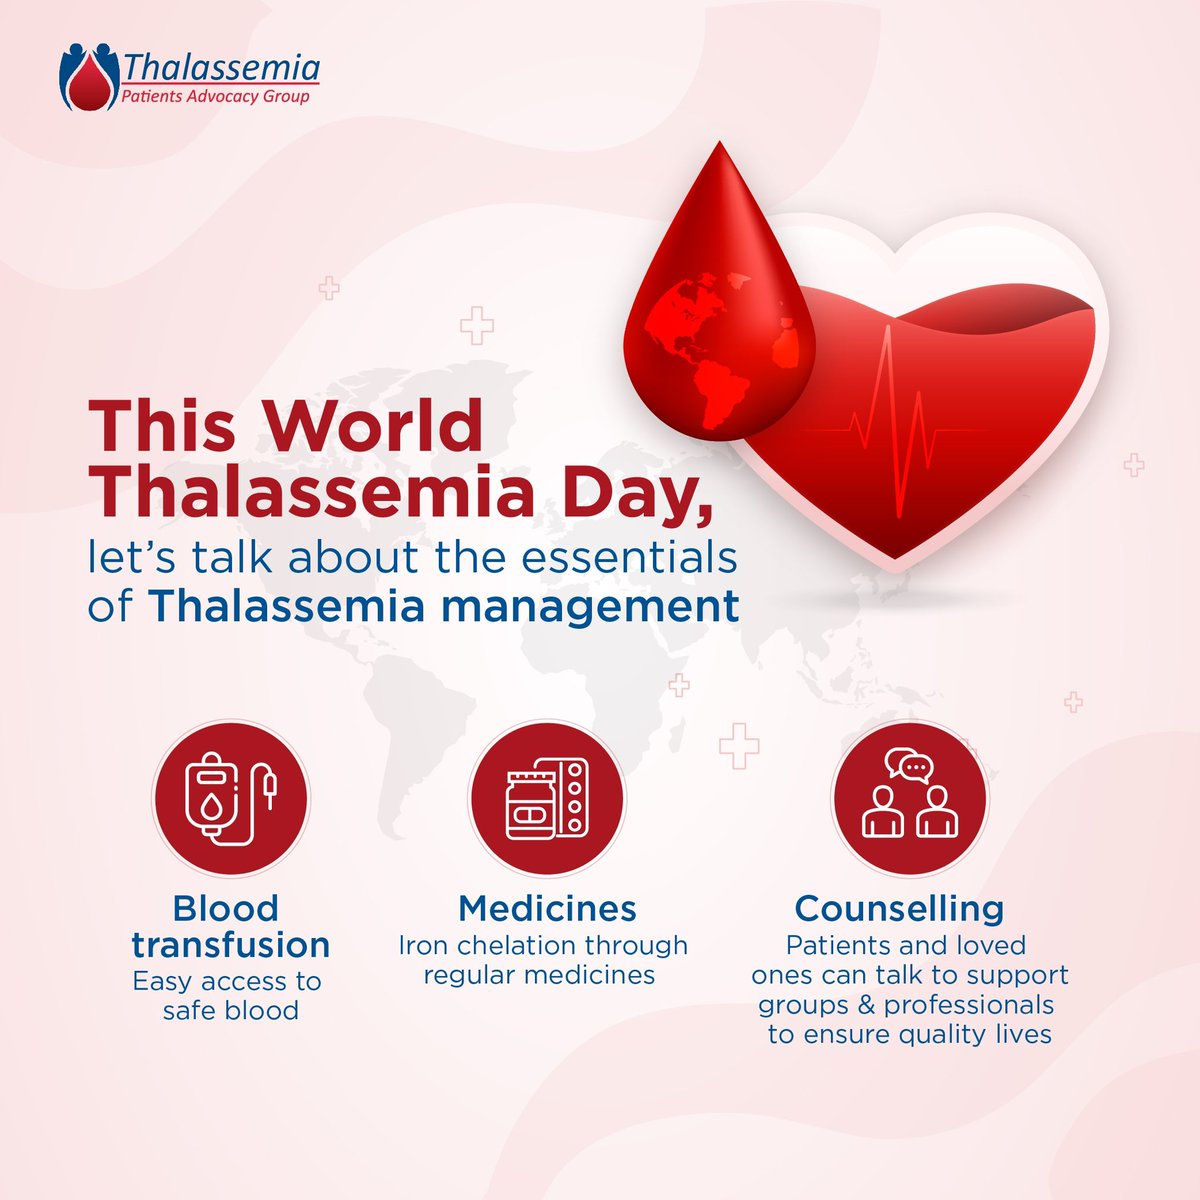 Thalassemia is treatable and can be well managed with blood transfusions, medicines, & knowledge. It is possible to achieve a healthy life through the guidance of doctors & support groups.@thalassaemiaTIF #WorldThalassemiaDay #beawaresharecare @ThalassemicsI